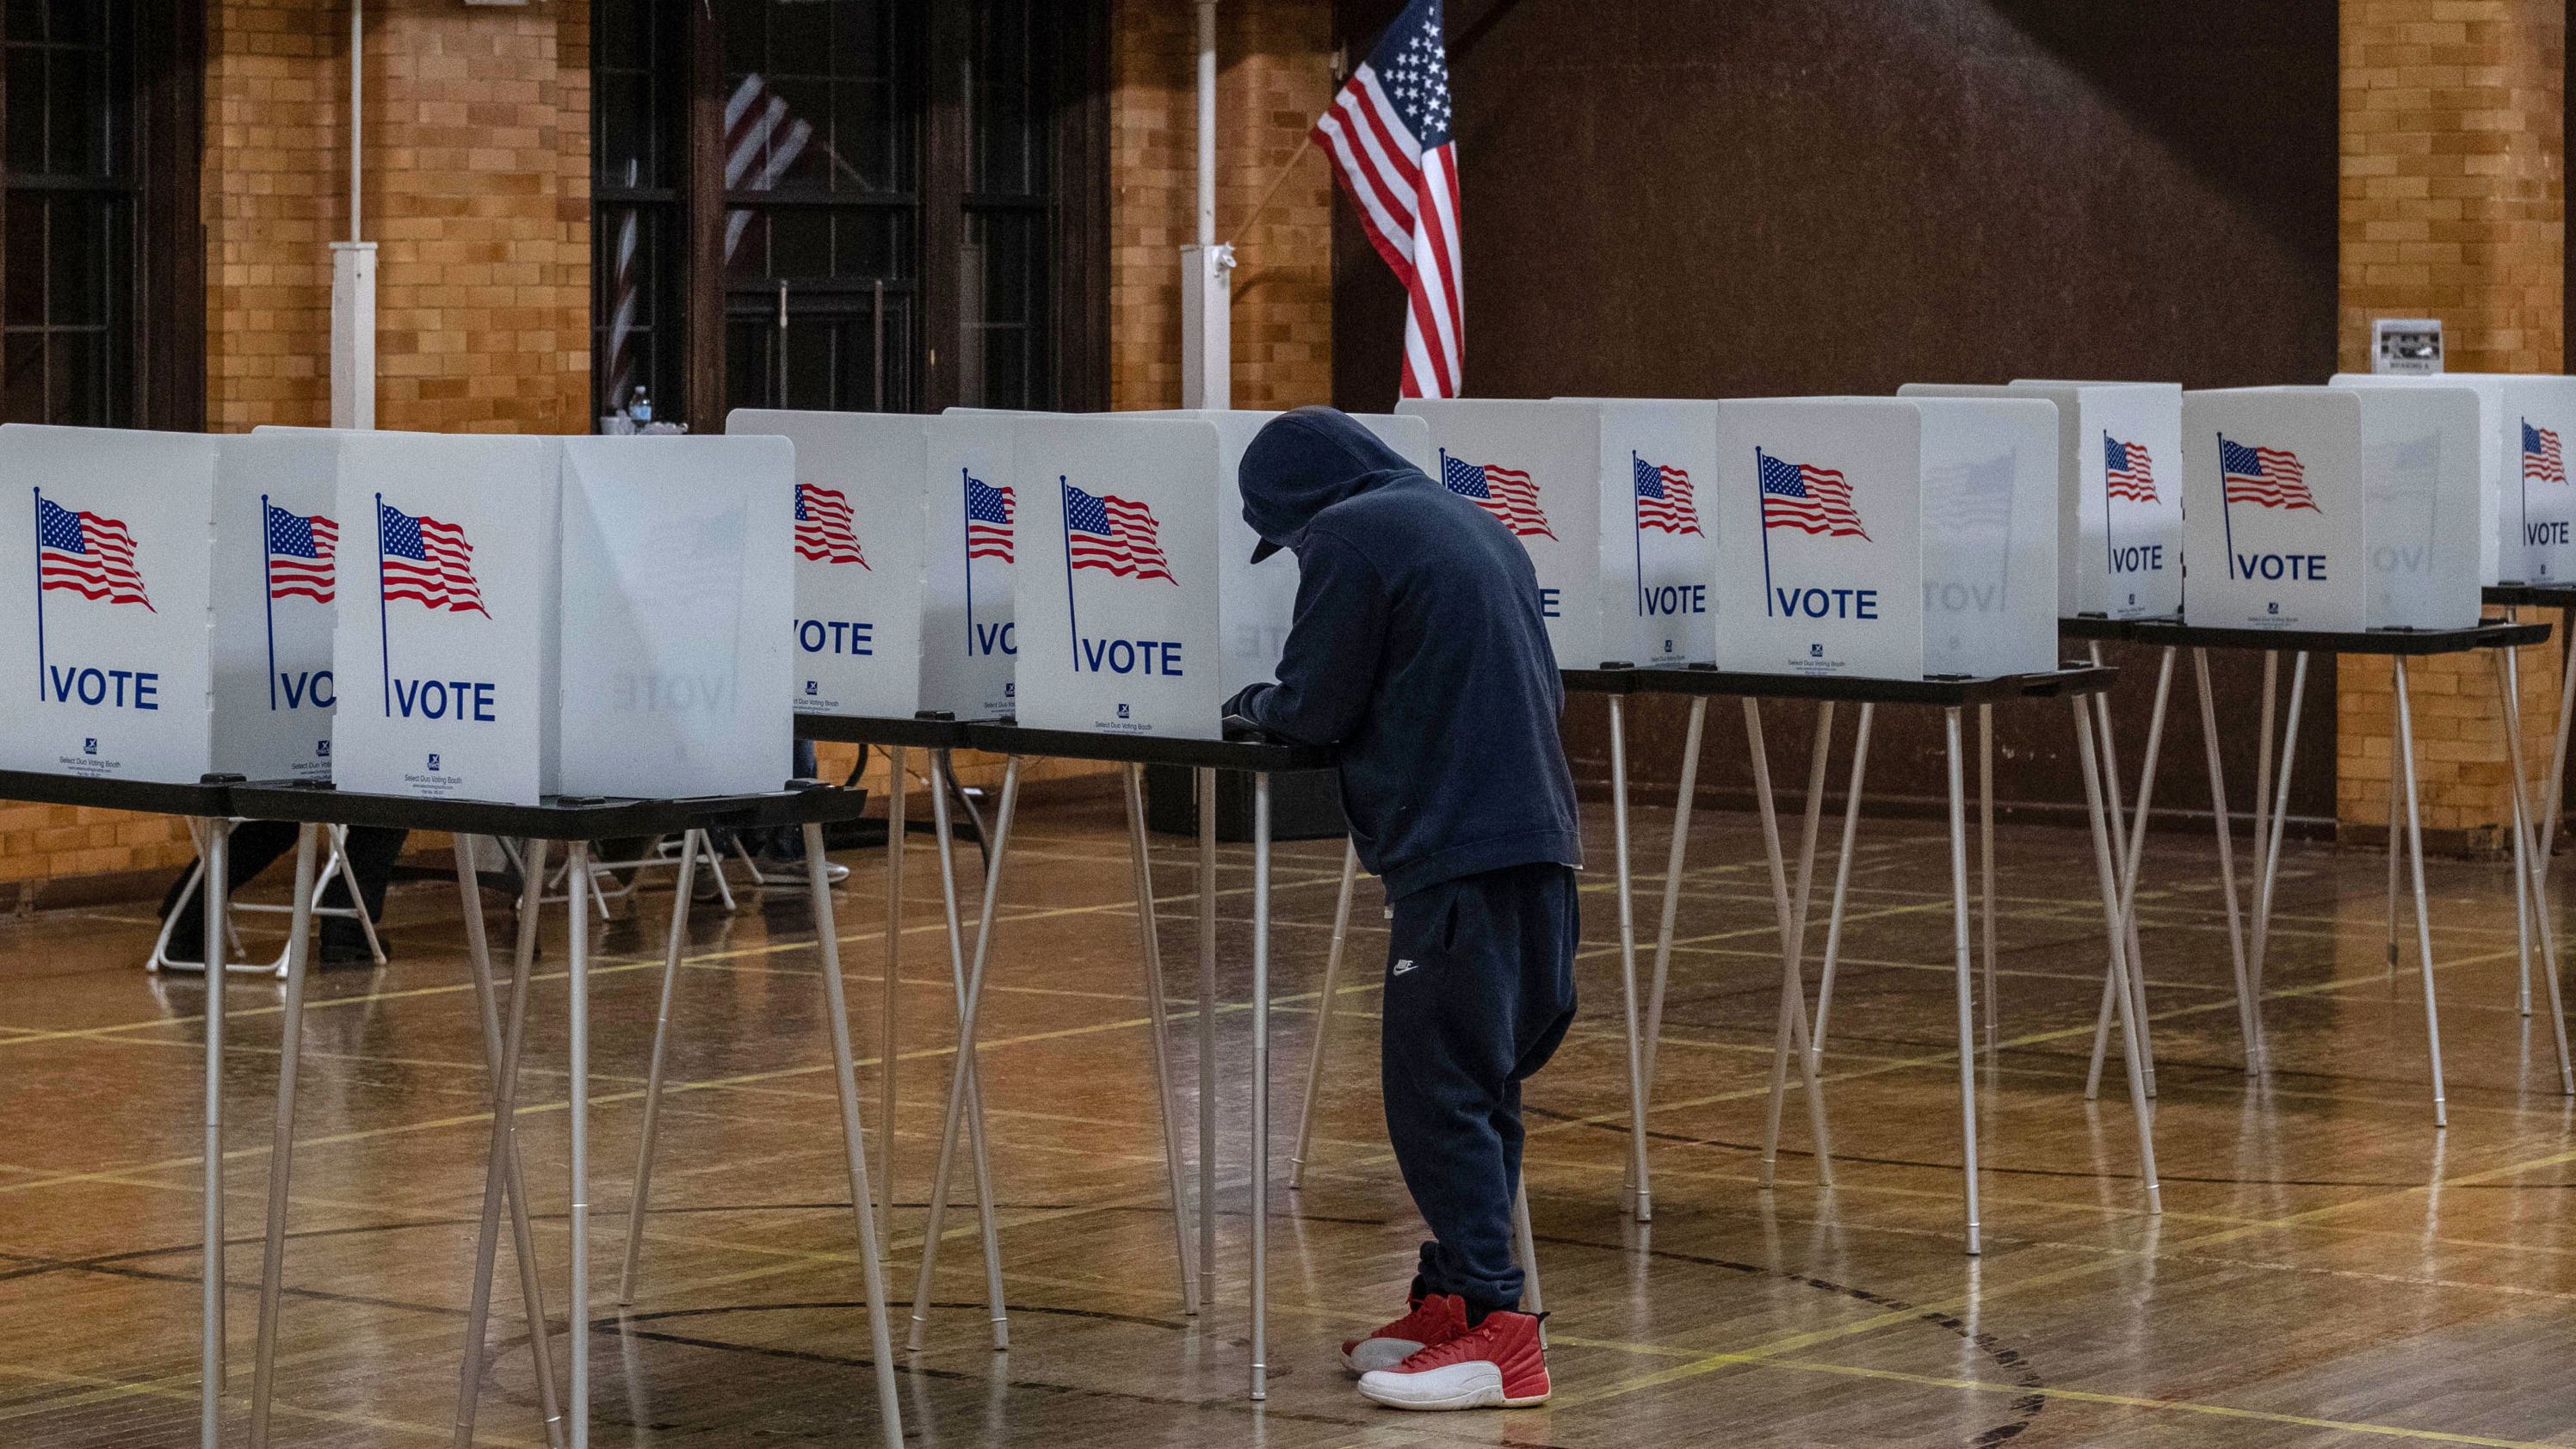 A resident casts his vote on November 3, 2020, at Berston Fieldhouse in Flint, Michigan.